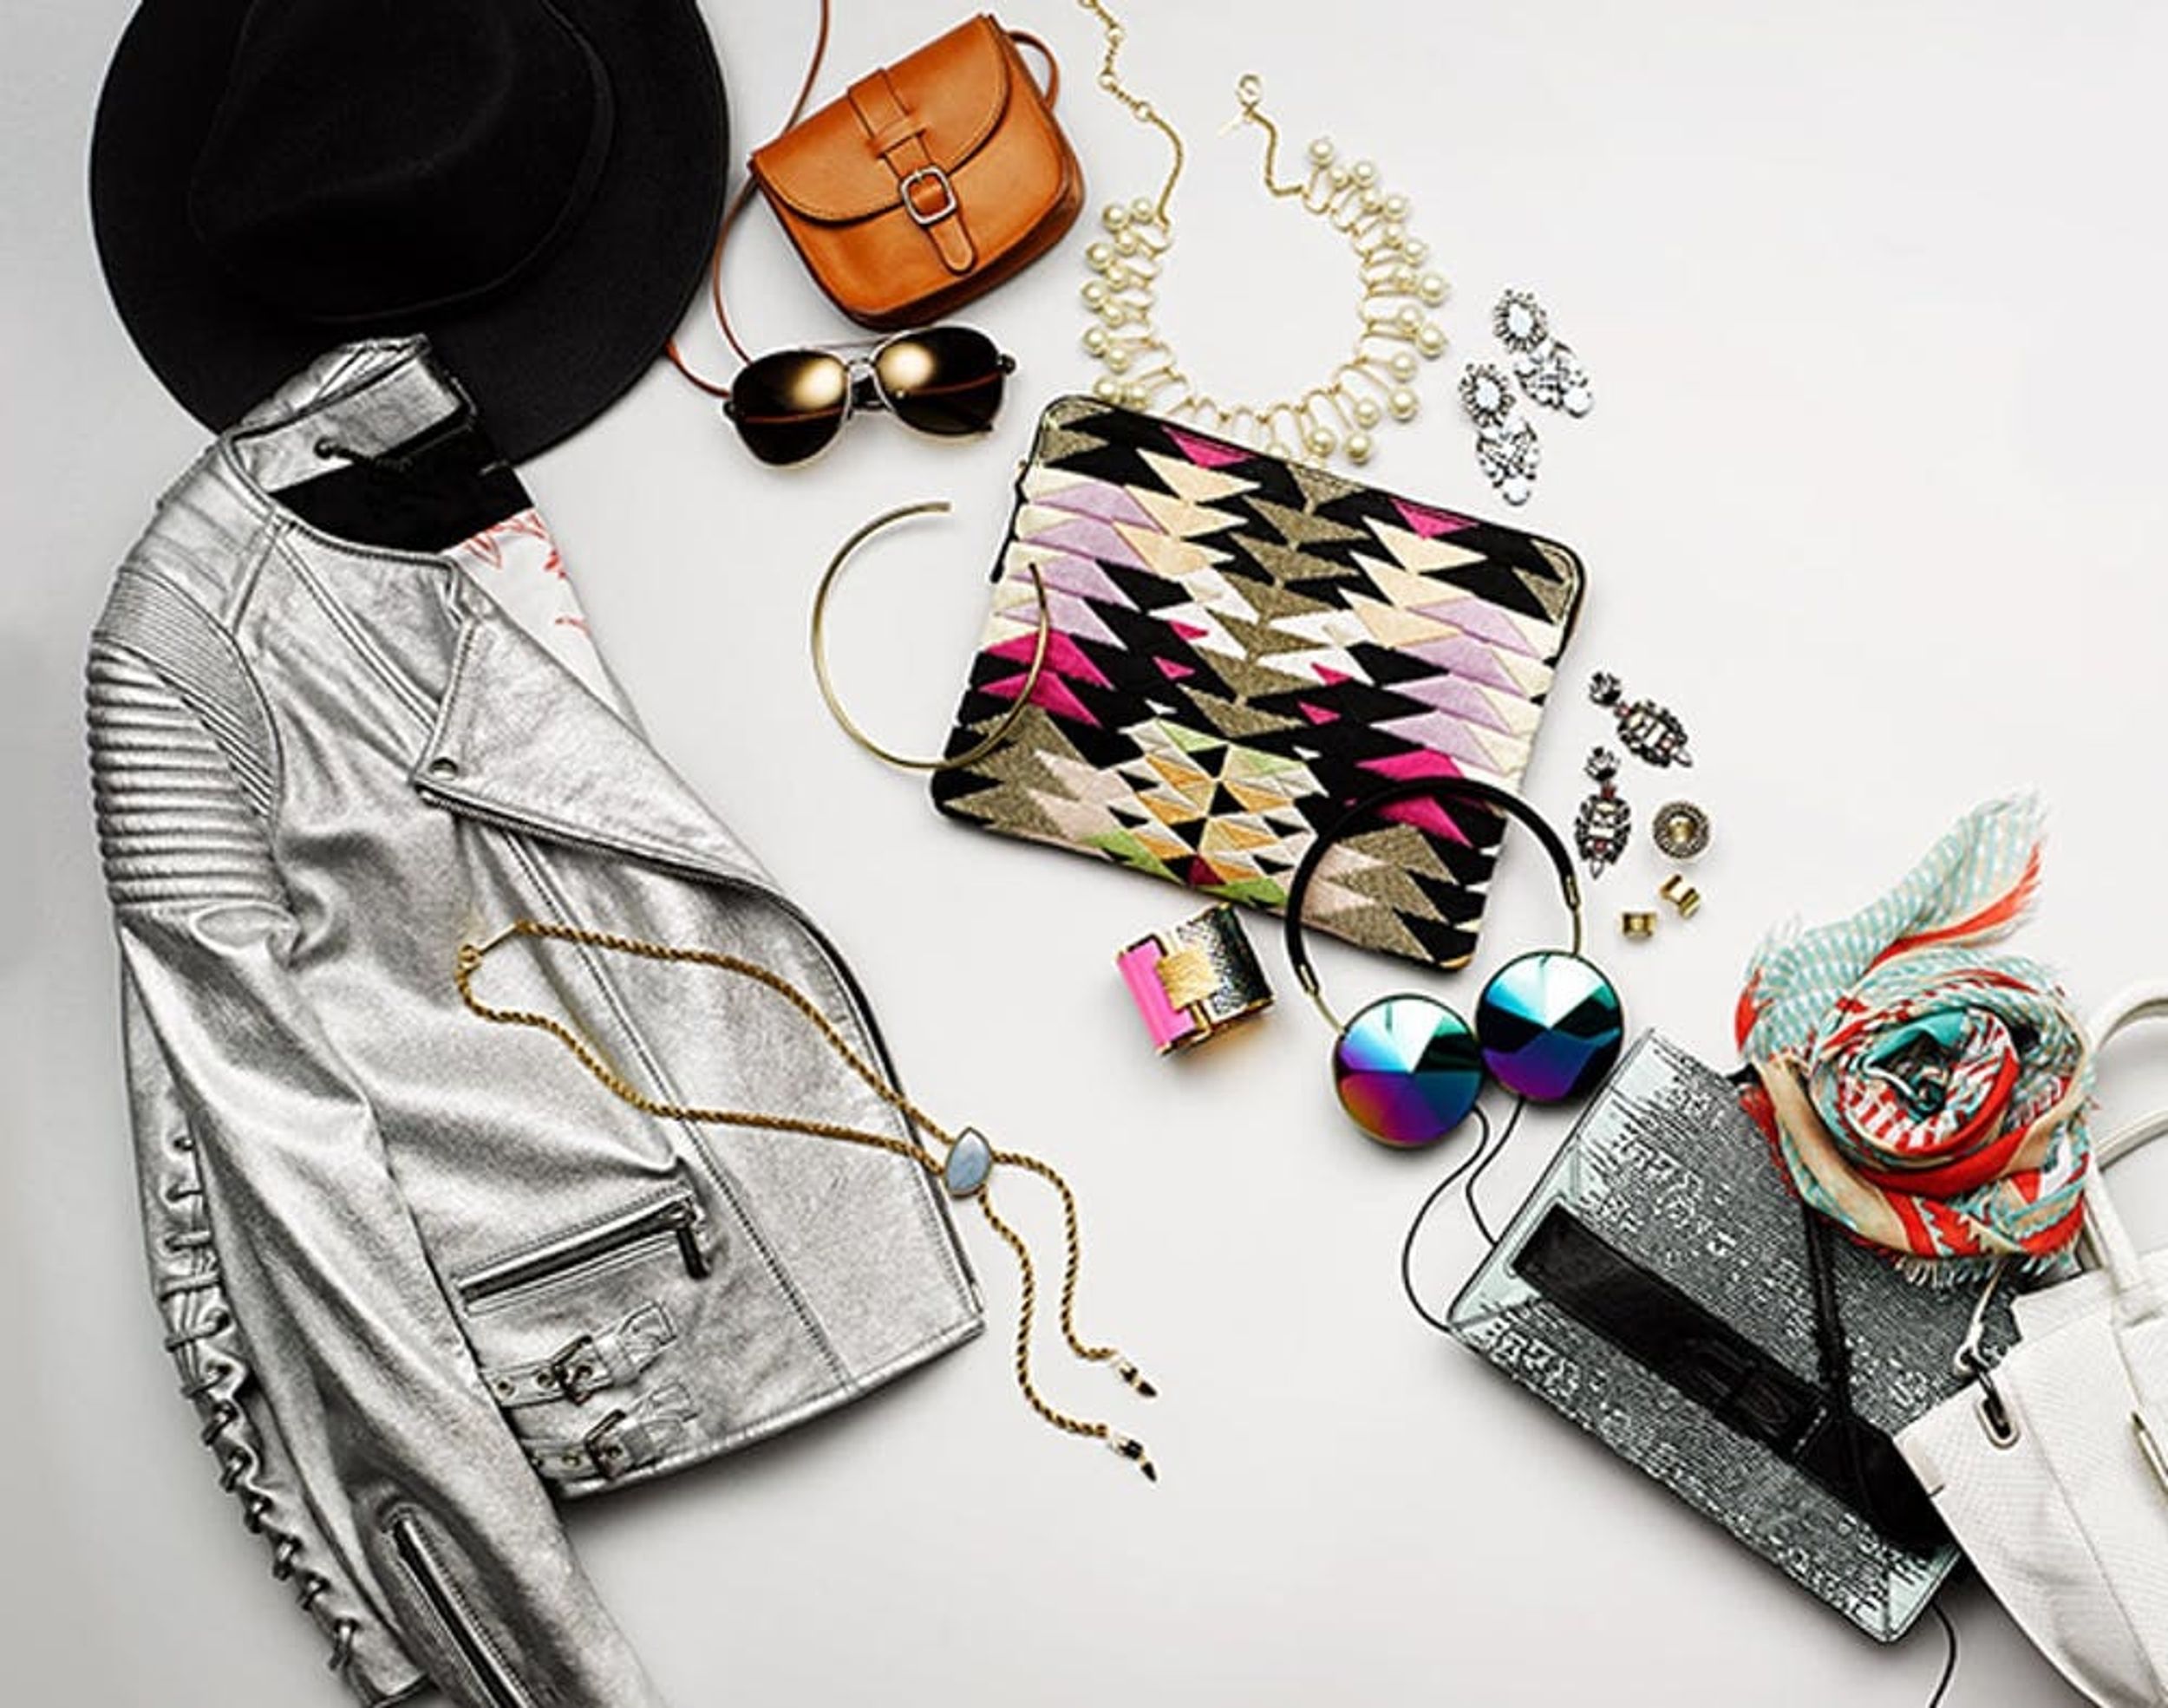 Rent the Runway’s New Service Gives You Unlimited Accessories Each Month